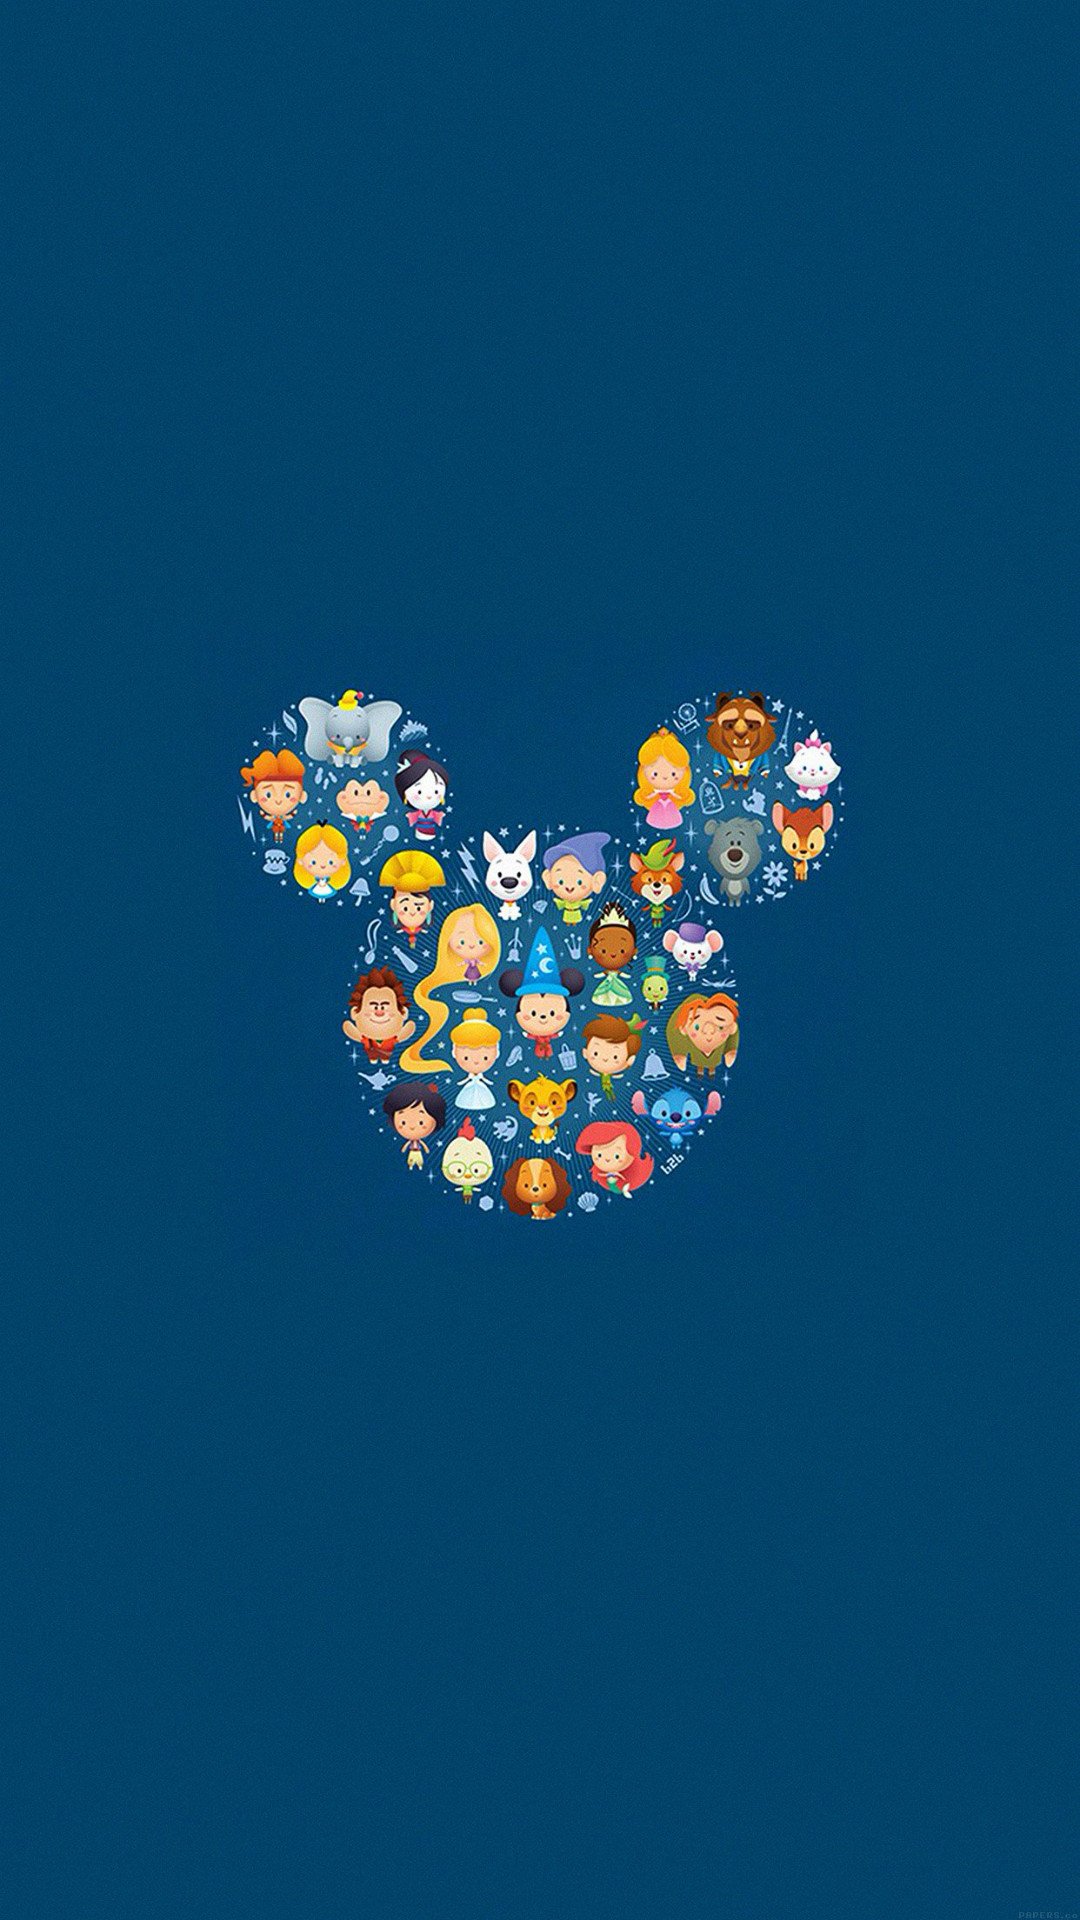 Disney Wallpaper for iPhone 5 72 images 1080x1920